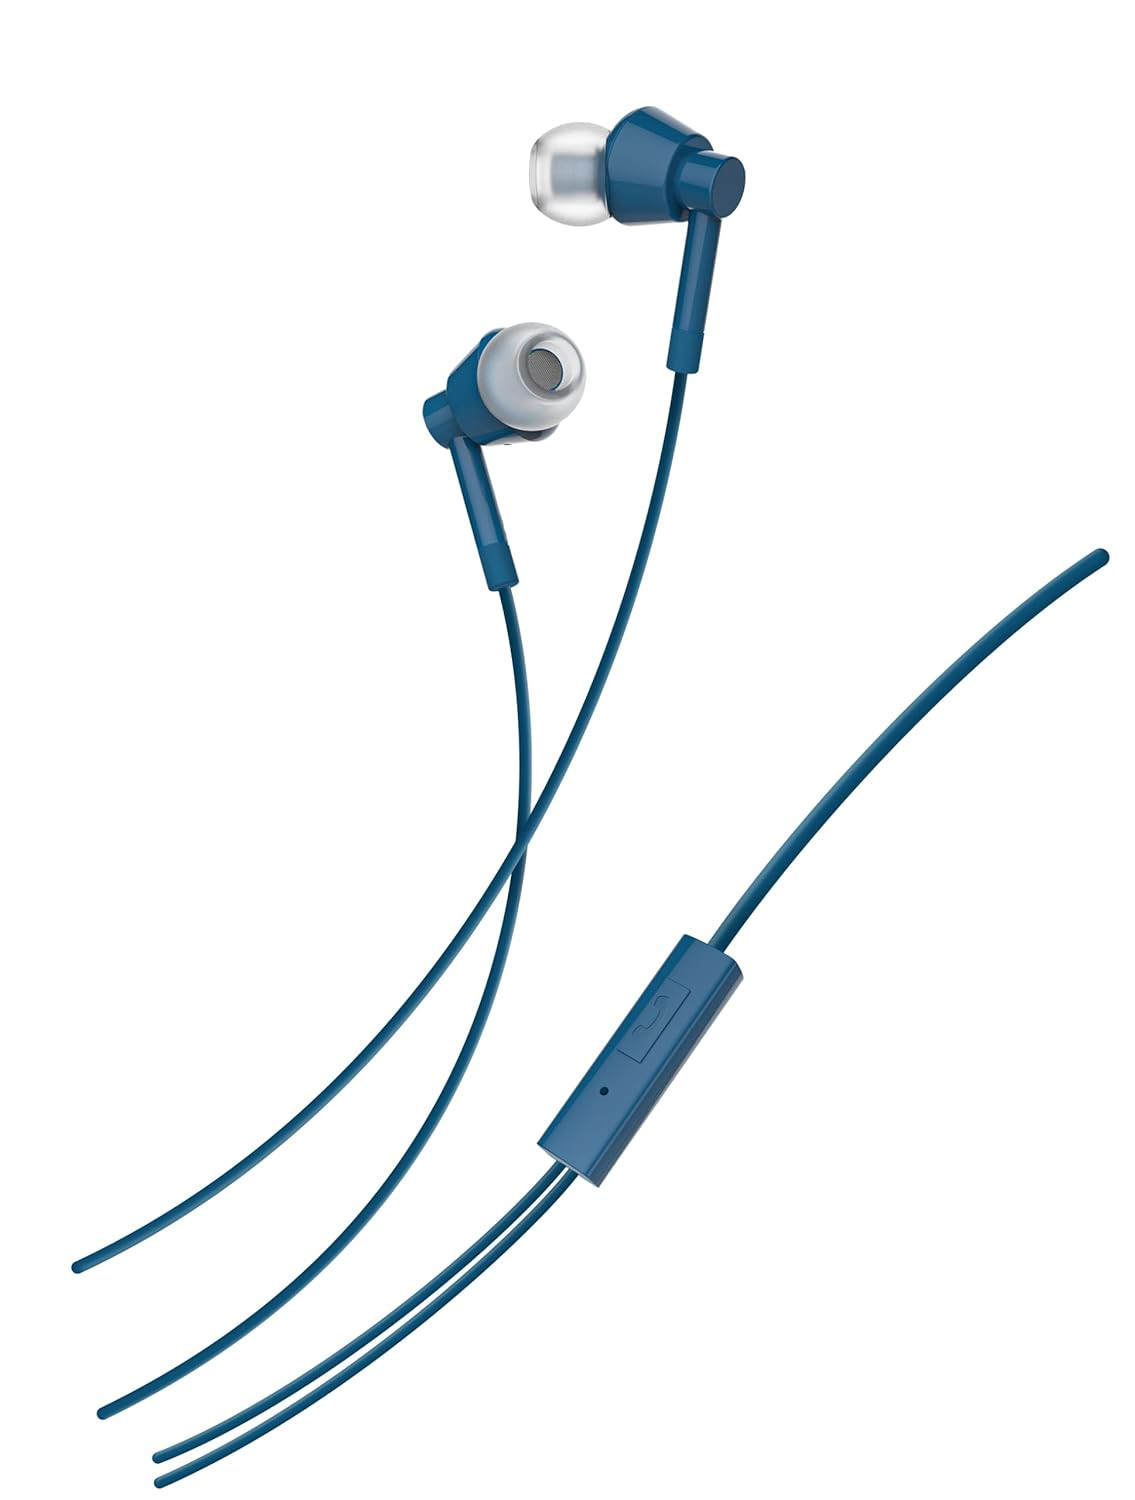 Nokia Wired in Ear Earphones (WB-101) with Powerful bass Performance, with mic for Clear Voice Calls, Virtual Assistant Control Enabled. Angled Acoustic Tubes for a Comfortable and Secure fit, Blue